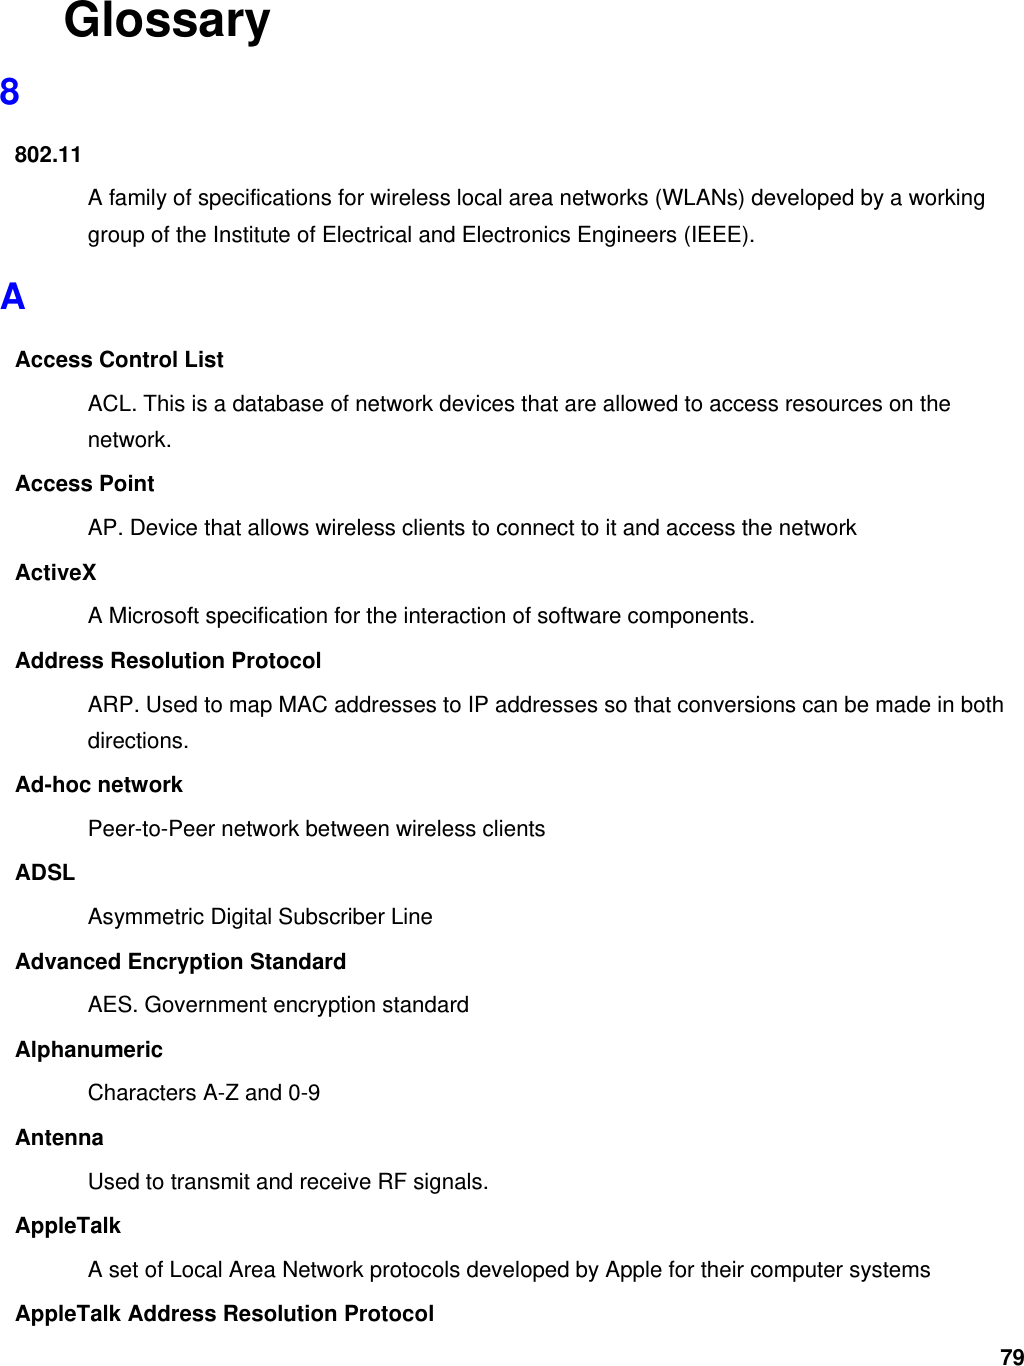 79 Glossary 8 802.11 A family of specifications for wireless local area networks (WLANs) developed by a working group of the Institute of Electrical and Electronics Engineers (IEEE).   A Access Control List ACL. This is a database of network devices that are allowed to access resources on the network. Access Point AP. Device that allows wireless clients to connect to it and access the network ActiveX A Microsoft specification for the interaction of software components.   Address Resolution Protocol ARP. Used to map MAC addresses to IP addresses so that conversions can be made in both directions. Ad-hoc network Peer-to-Peer network between wireless clients ADSL Asymmetric Digital Subscriber Line Advanced Encryption Standard AES. Government encryption standard Alphanumeric Characters A-Z and 0-9 Antenna Used to transmit and receive RF signals. AppleTalk A set of Local Area Network protocols developed by Apple for their computer systems AppleTalk Address Resolution Protocol 